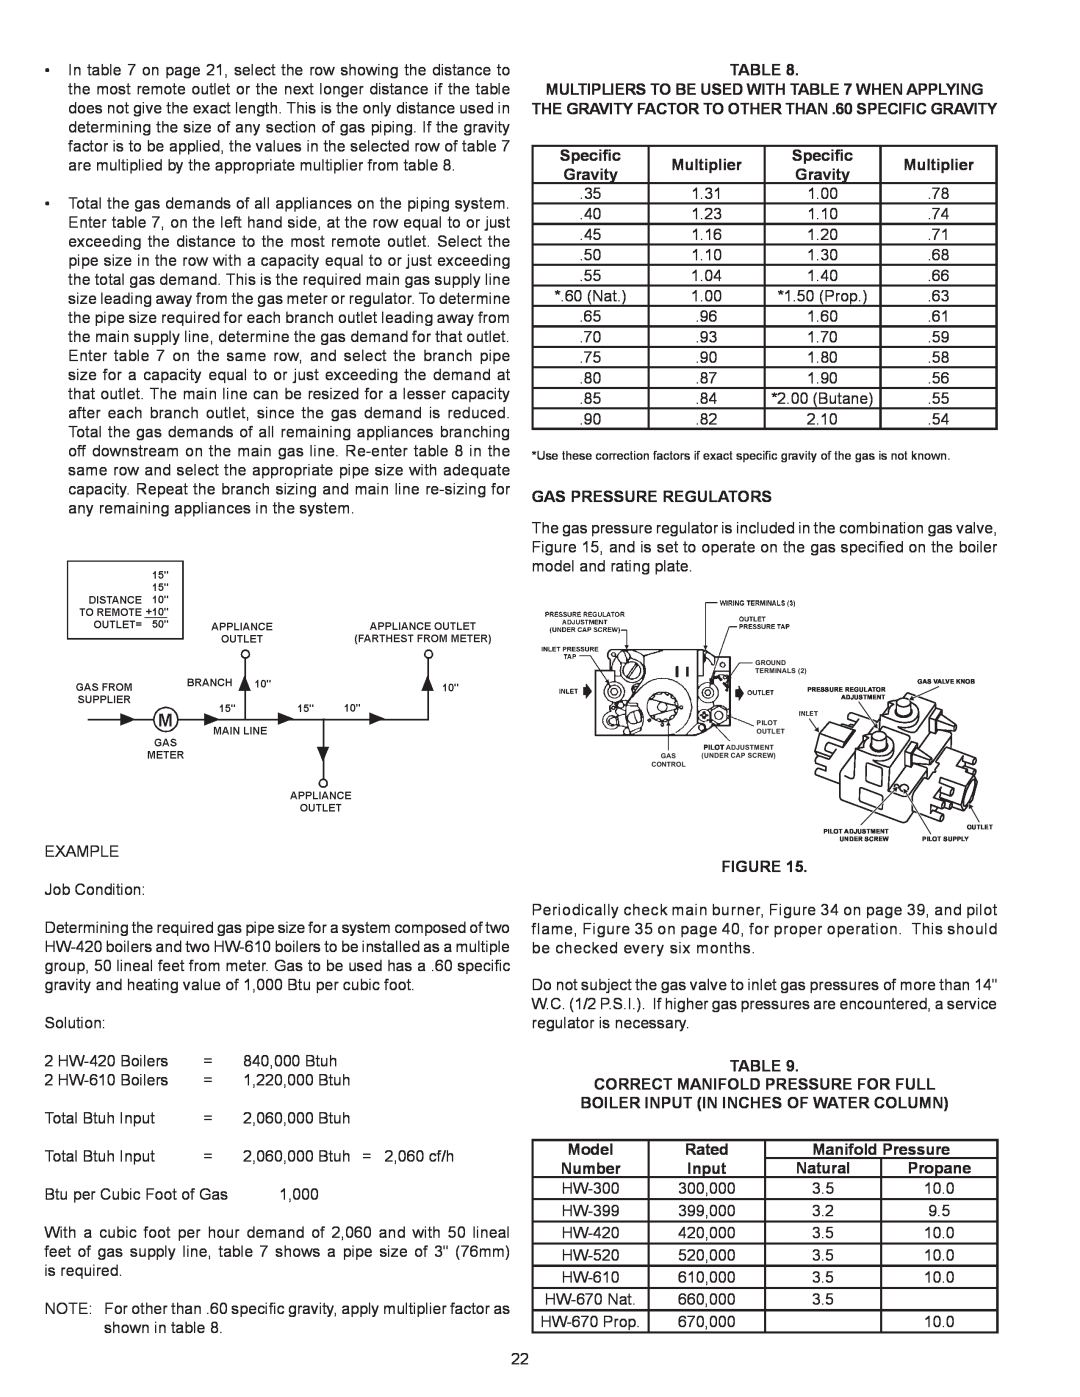 A.O. Smith HW 610 Specific, Multiplier, Gravity, Gas Pressure Regulators, Model, Rated, Manifold Pressure, Number, Input 